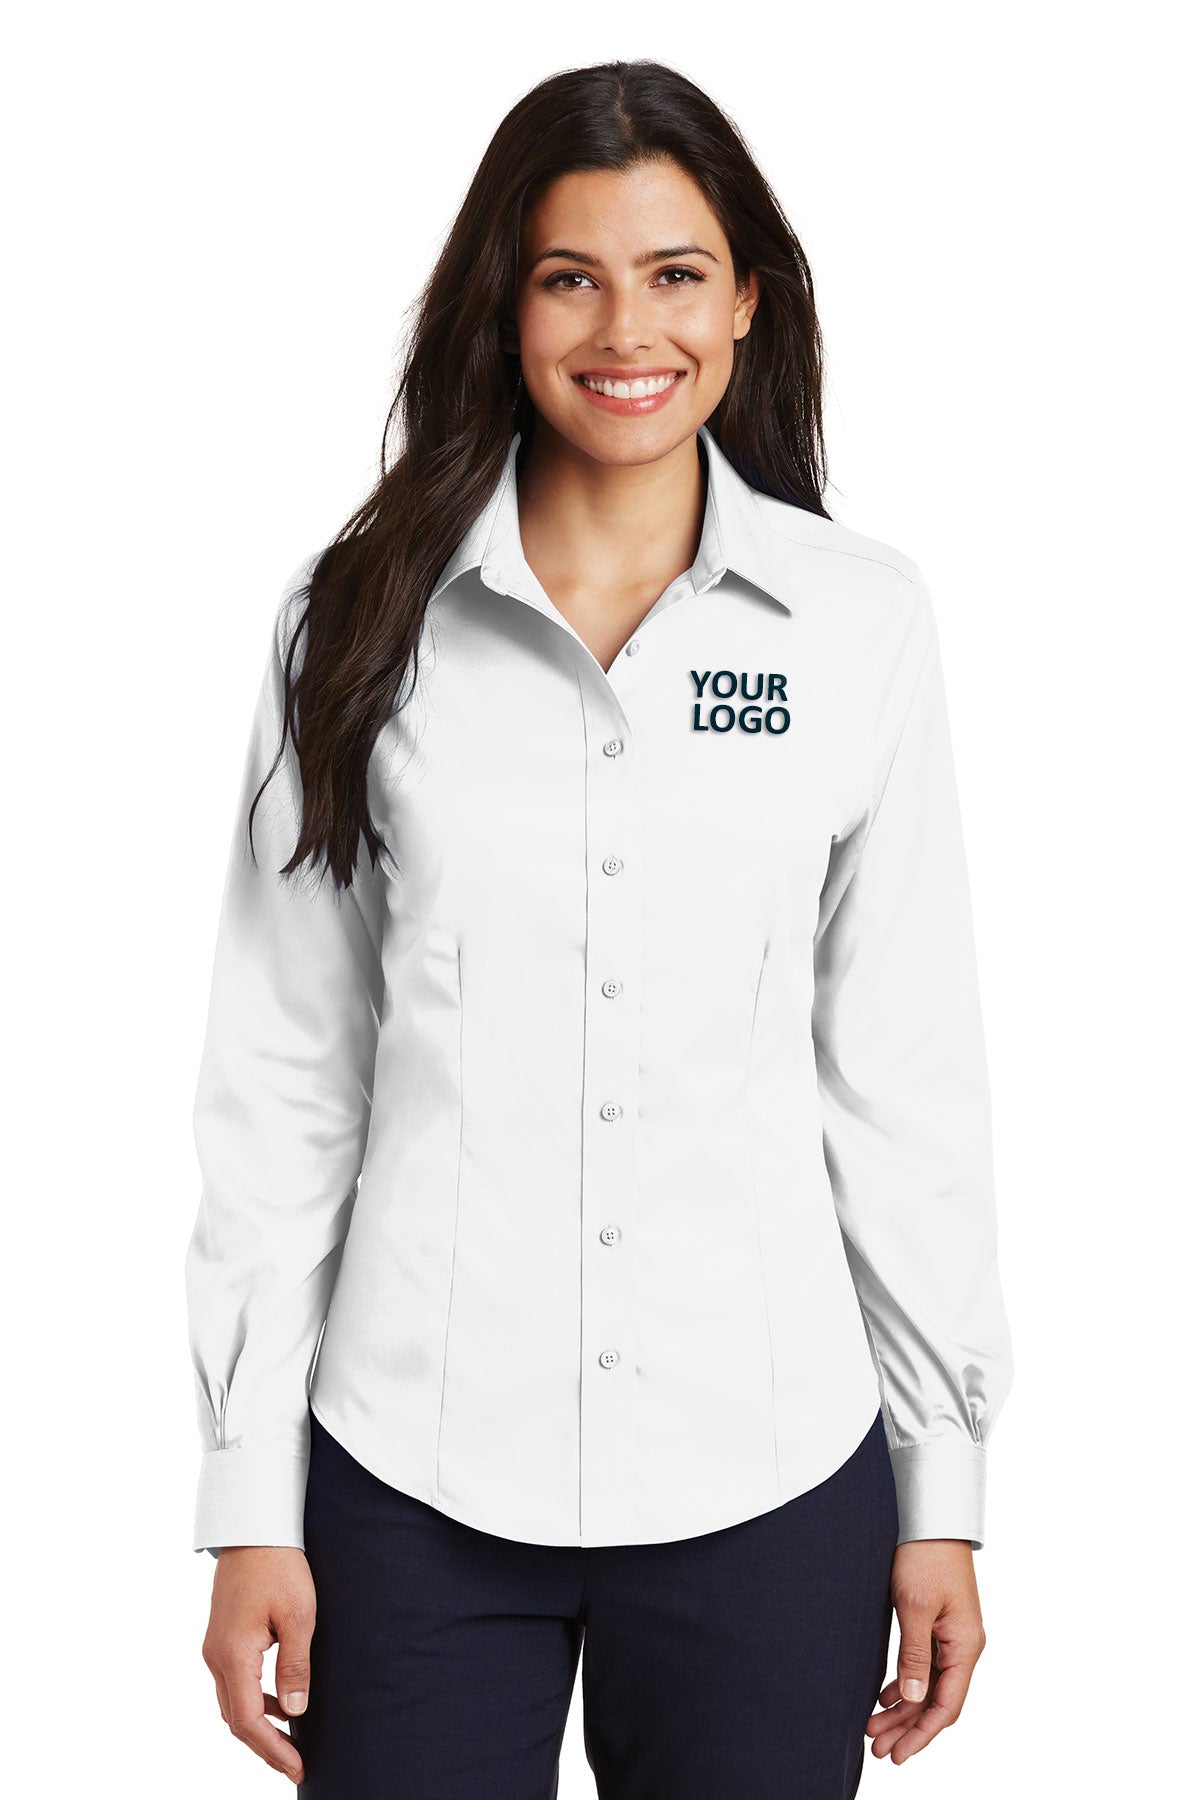 Port Authority White L638 business shirts with company logo